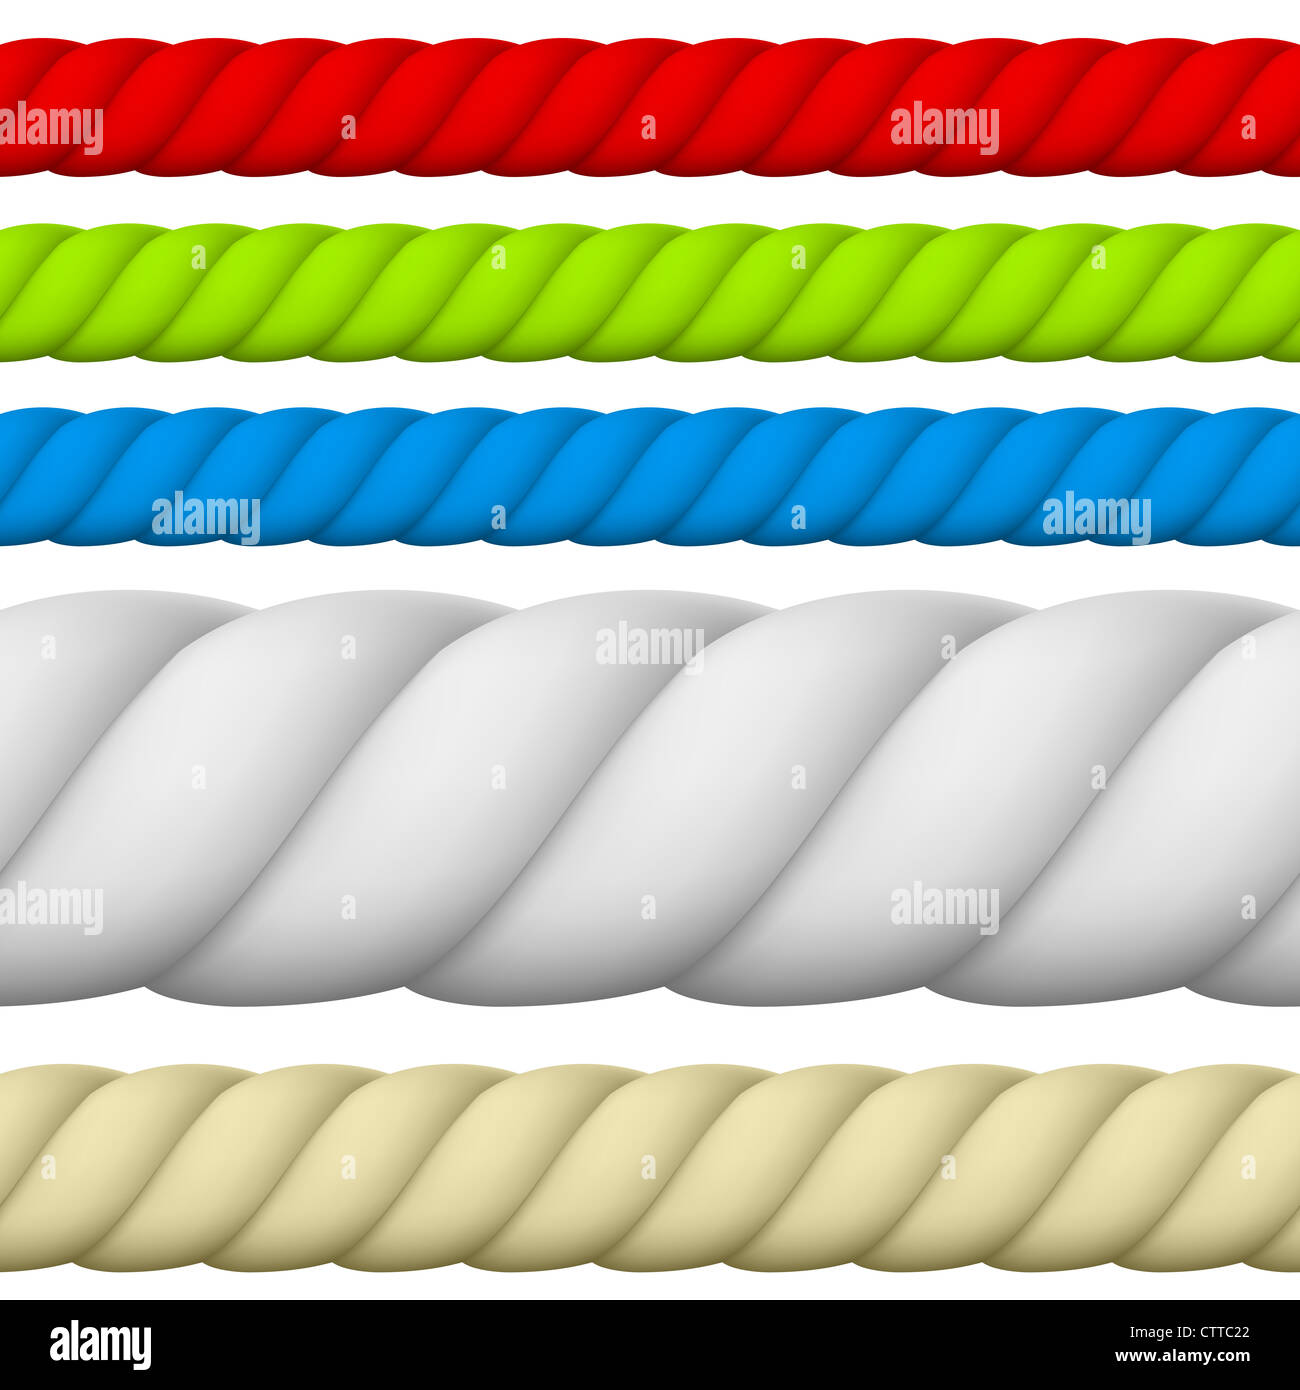 Illustration of Different size and color Rope. Stock Photo